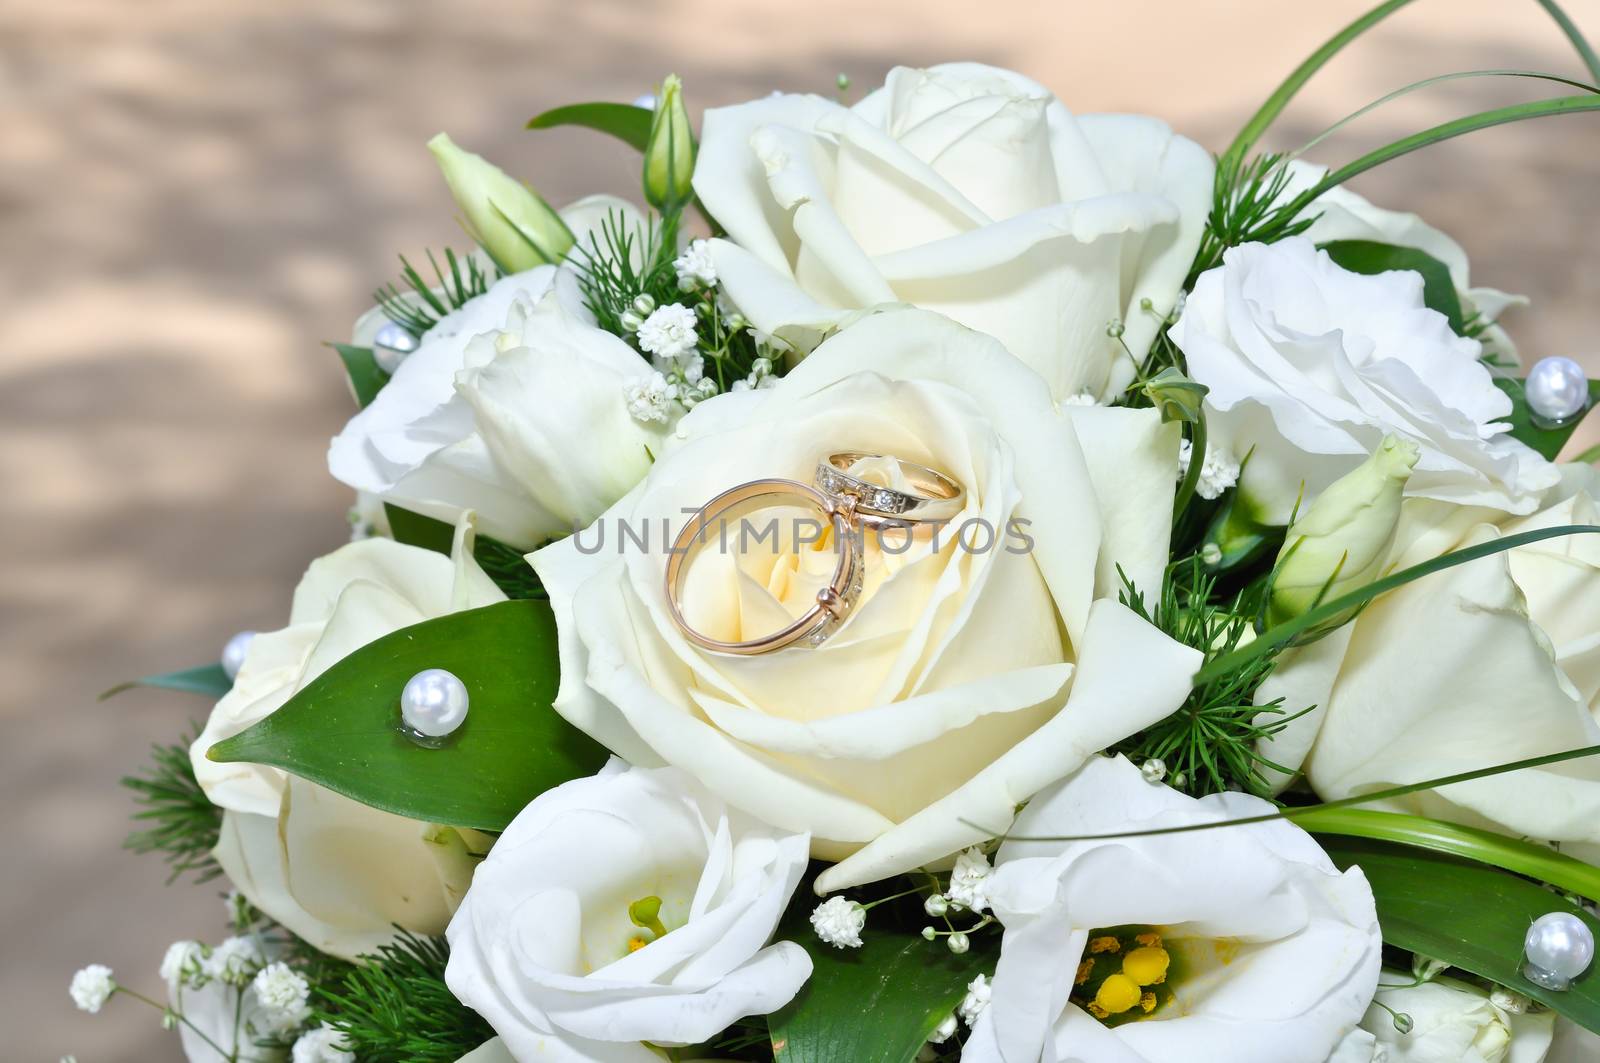 Wedding rings on a bouquet of white flowers by marynkin